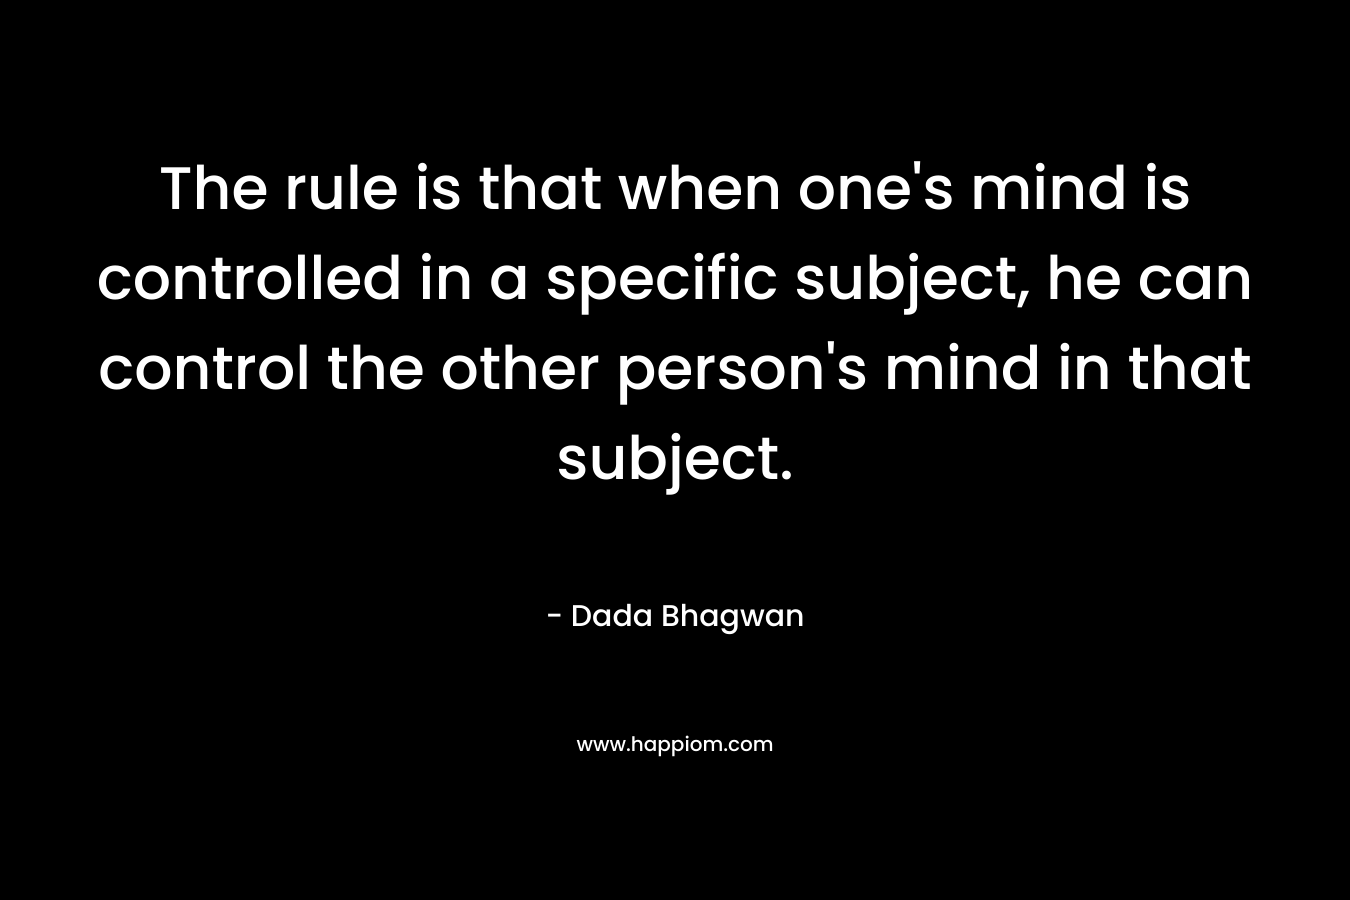 The rule is that when one's mind is controlled in a specific subject, he can control the other person's mind in that subject.